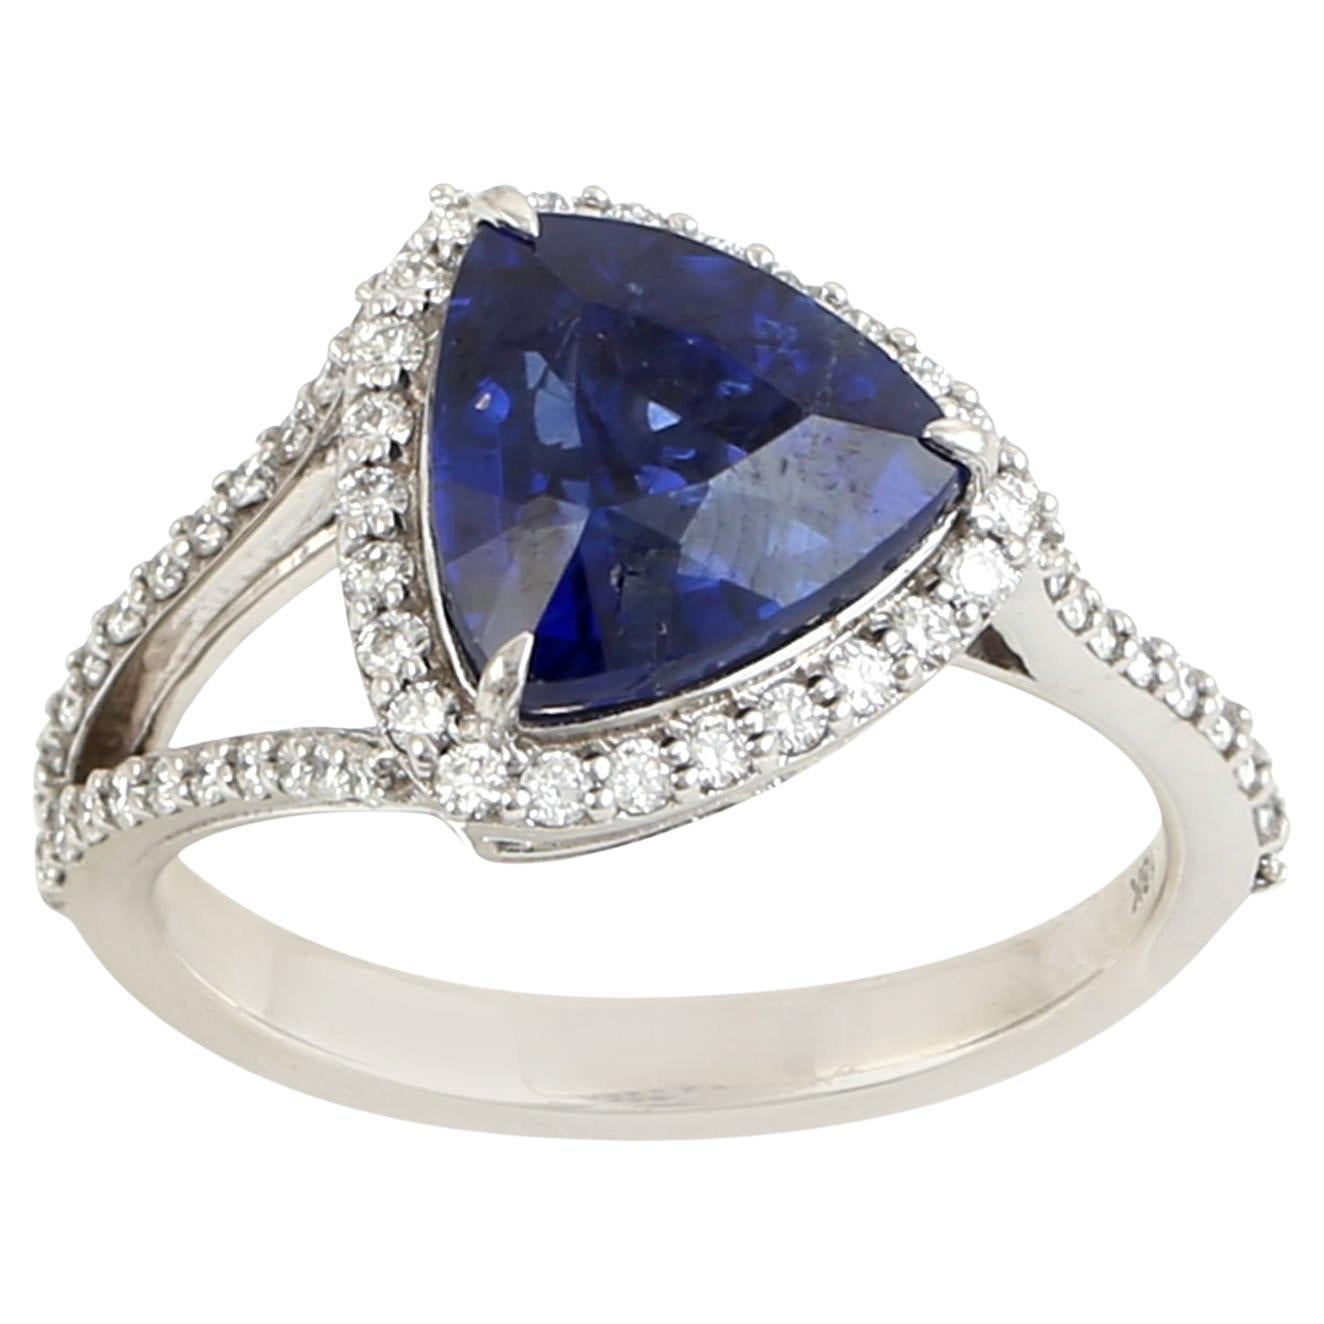 Blue Sapphire Cocktail Ring With Diamonds Made in 18k White Gold For Sale